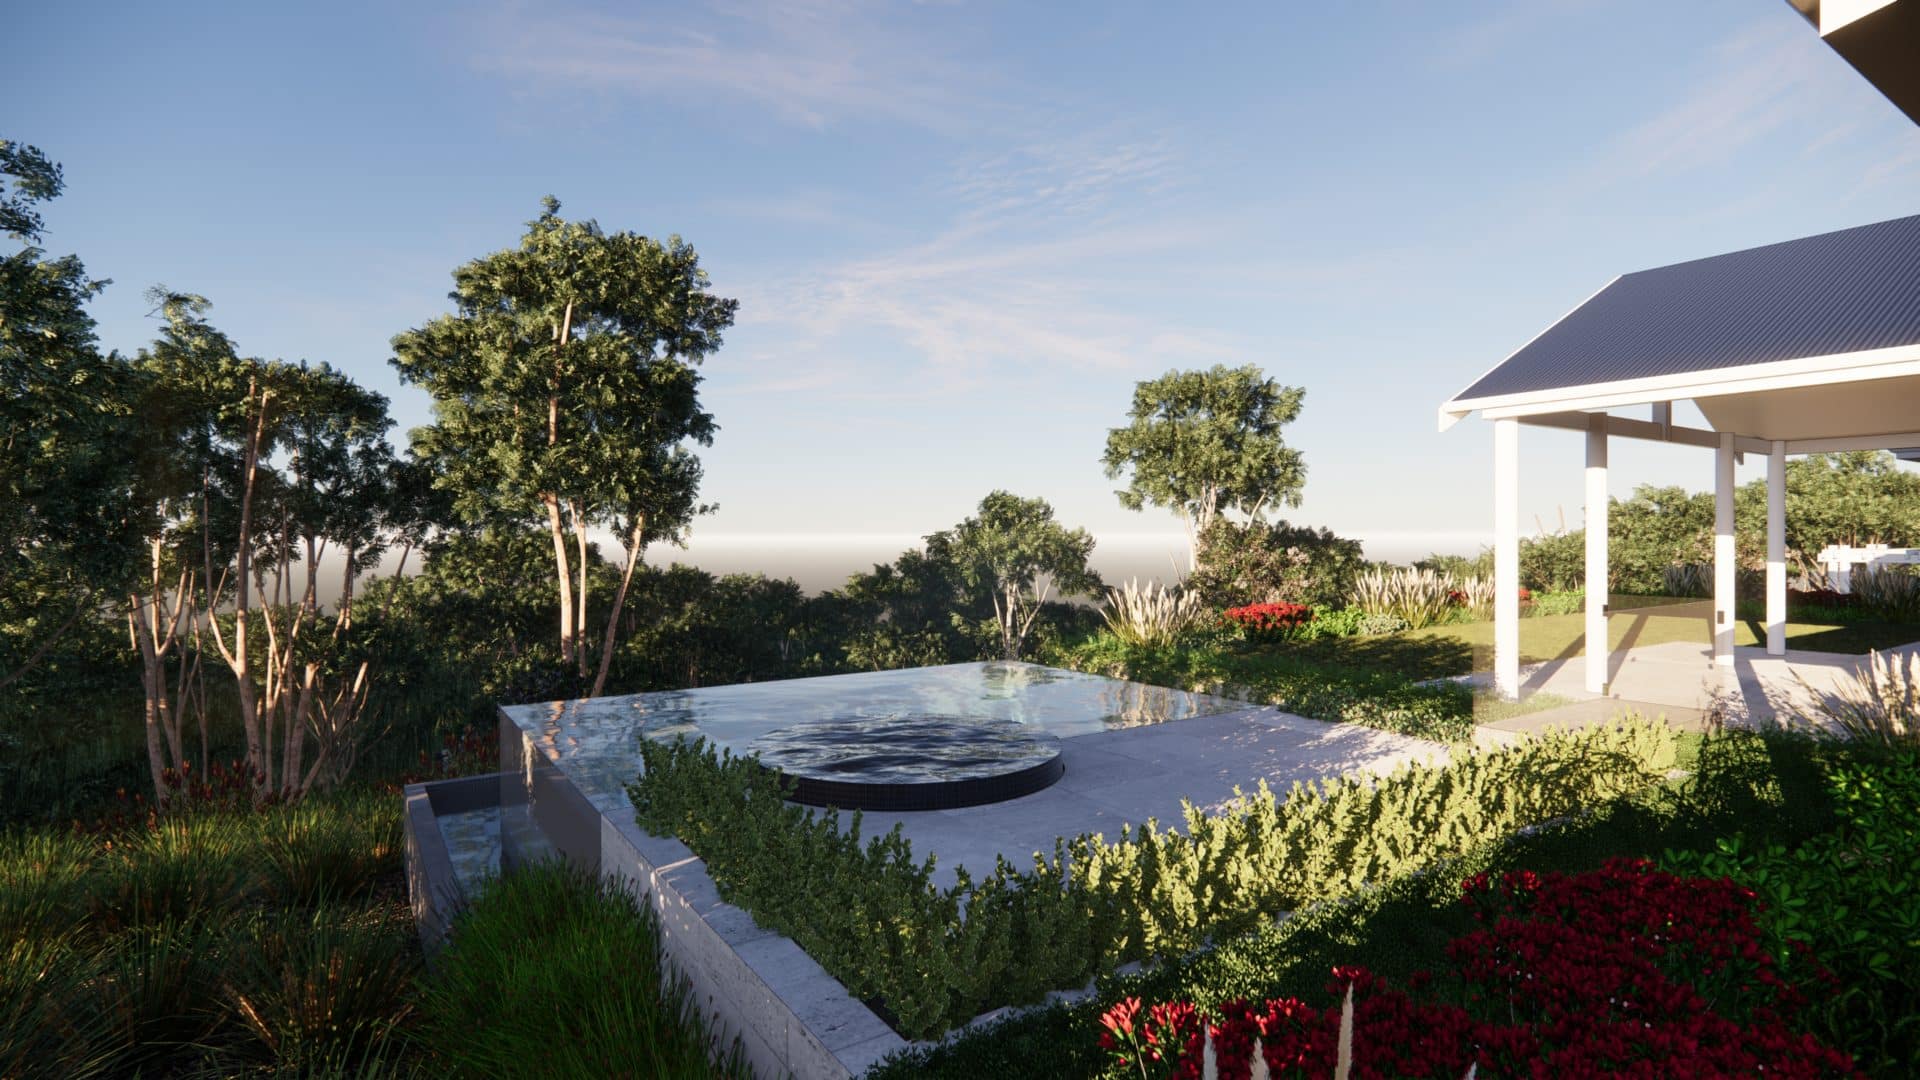 a landscape design render showing an infinity pool and spa.